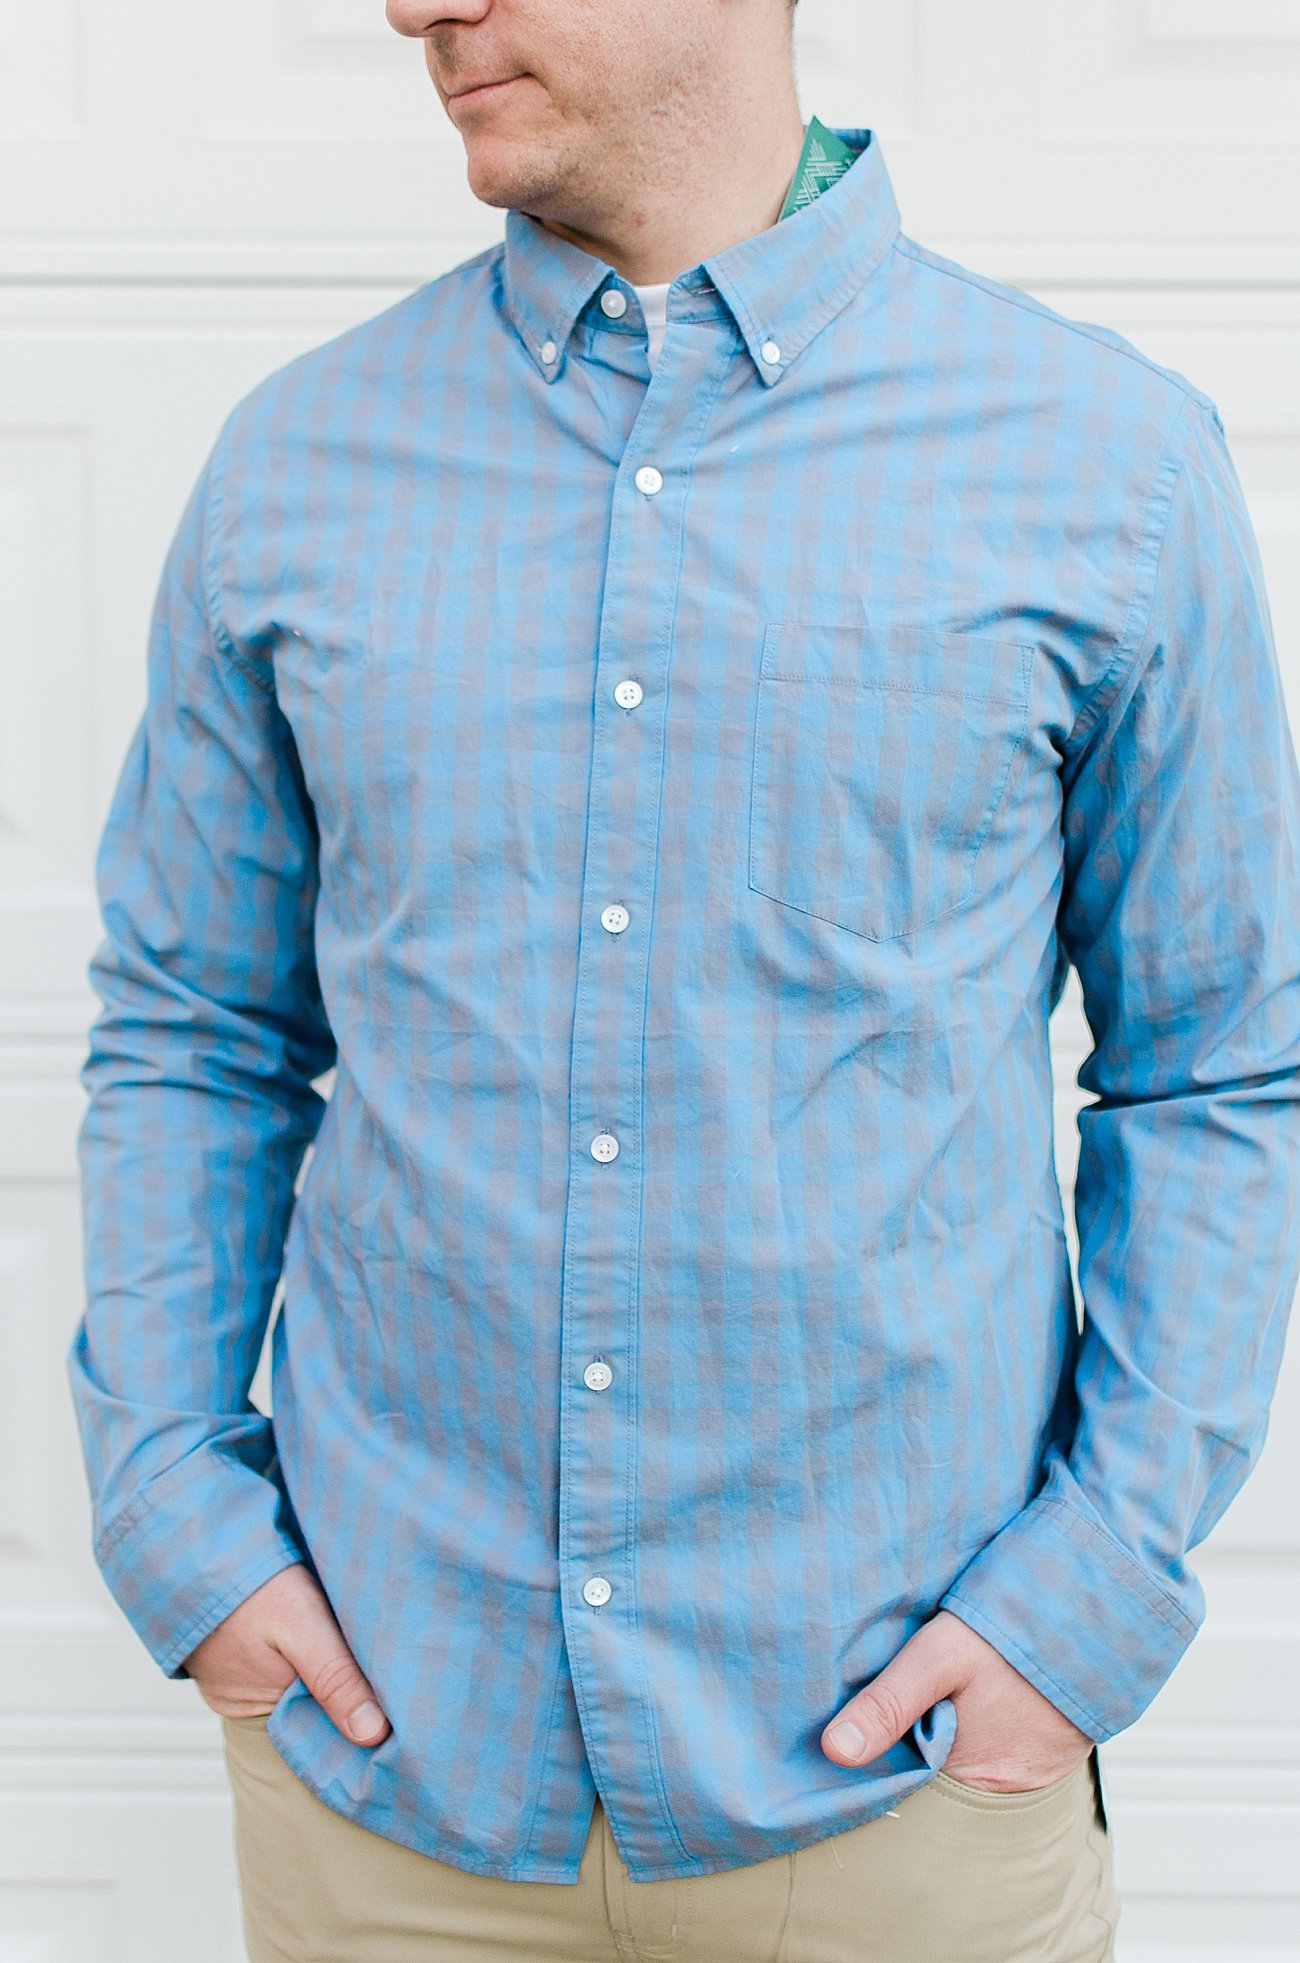 HAWKER RYE - Long Sleeve Button Down Shirt - SIZE XL - $48 Stitch Fix for Men Review